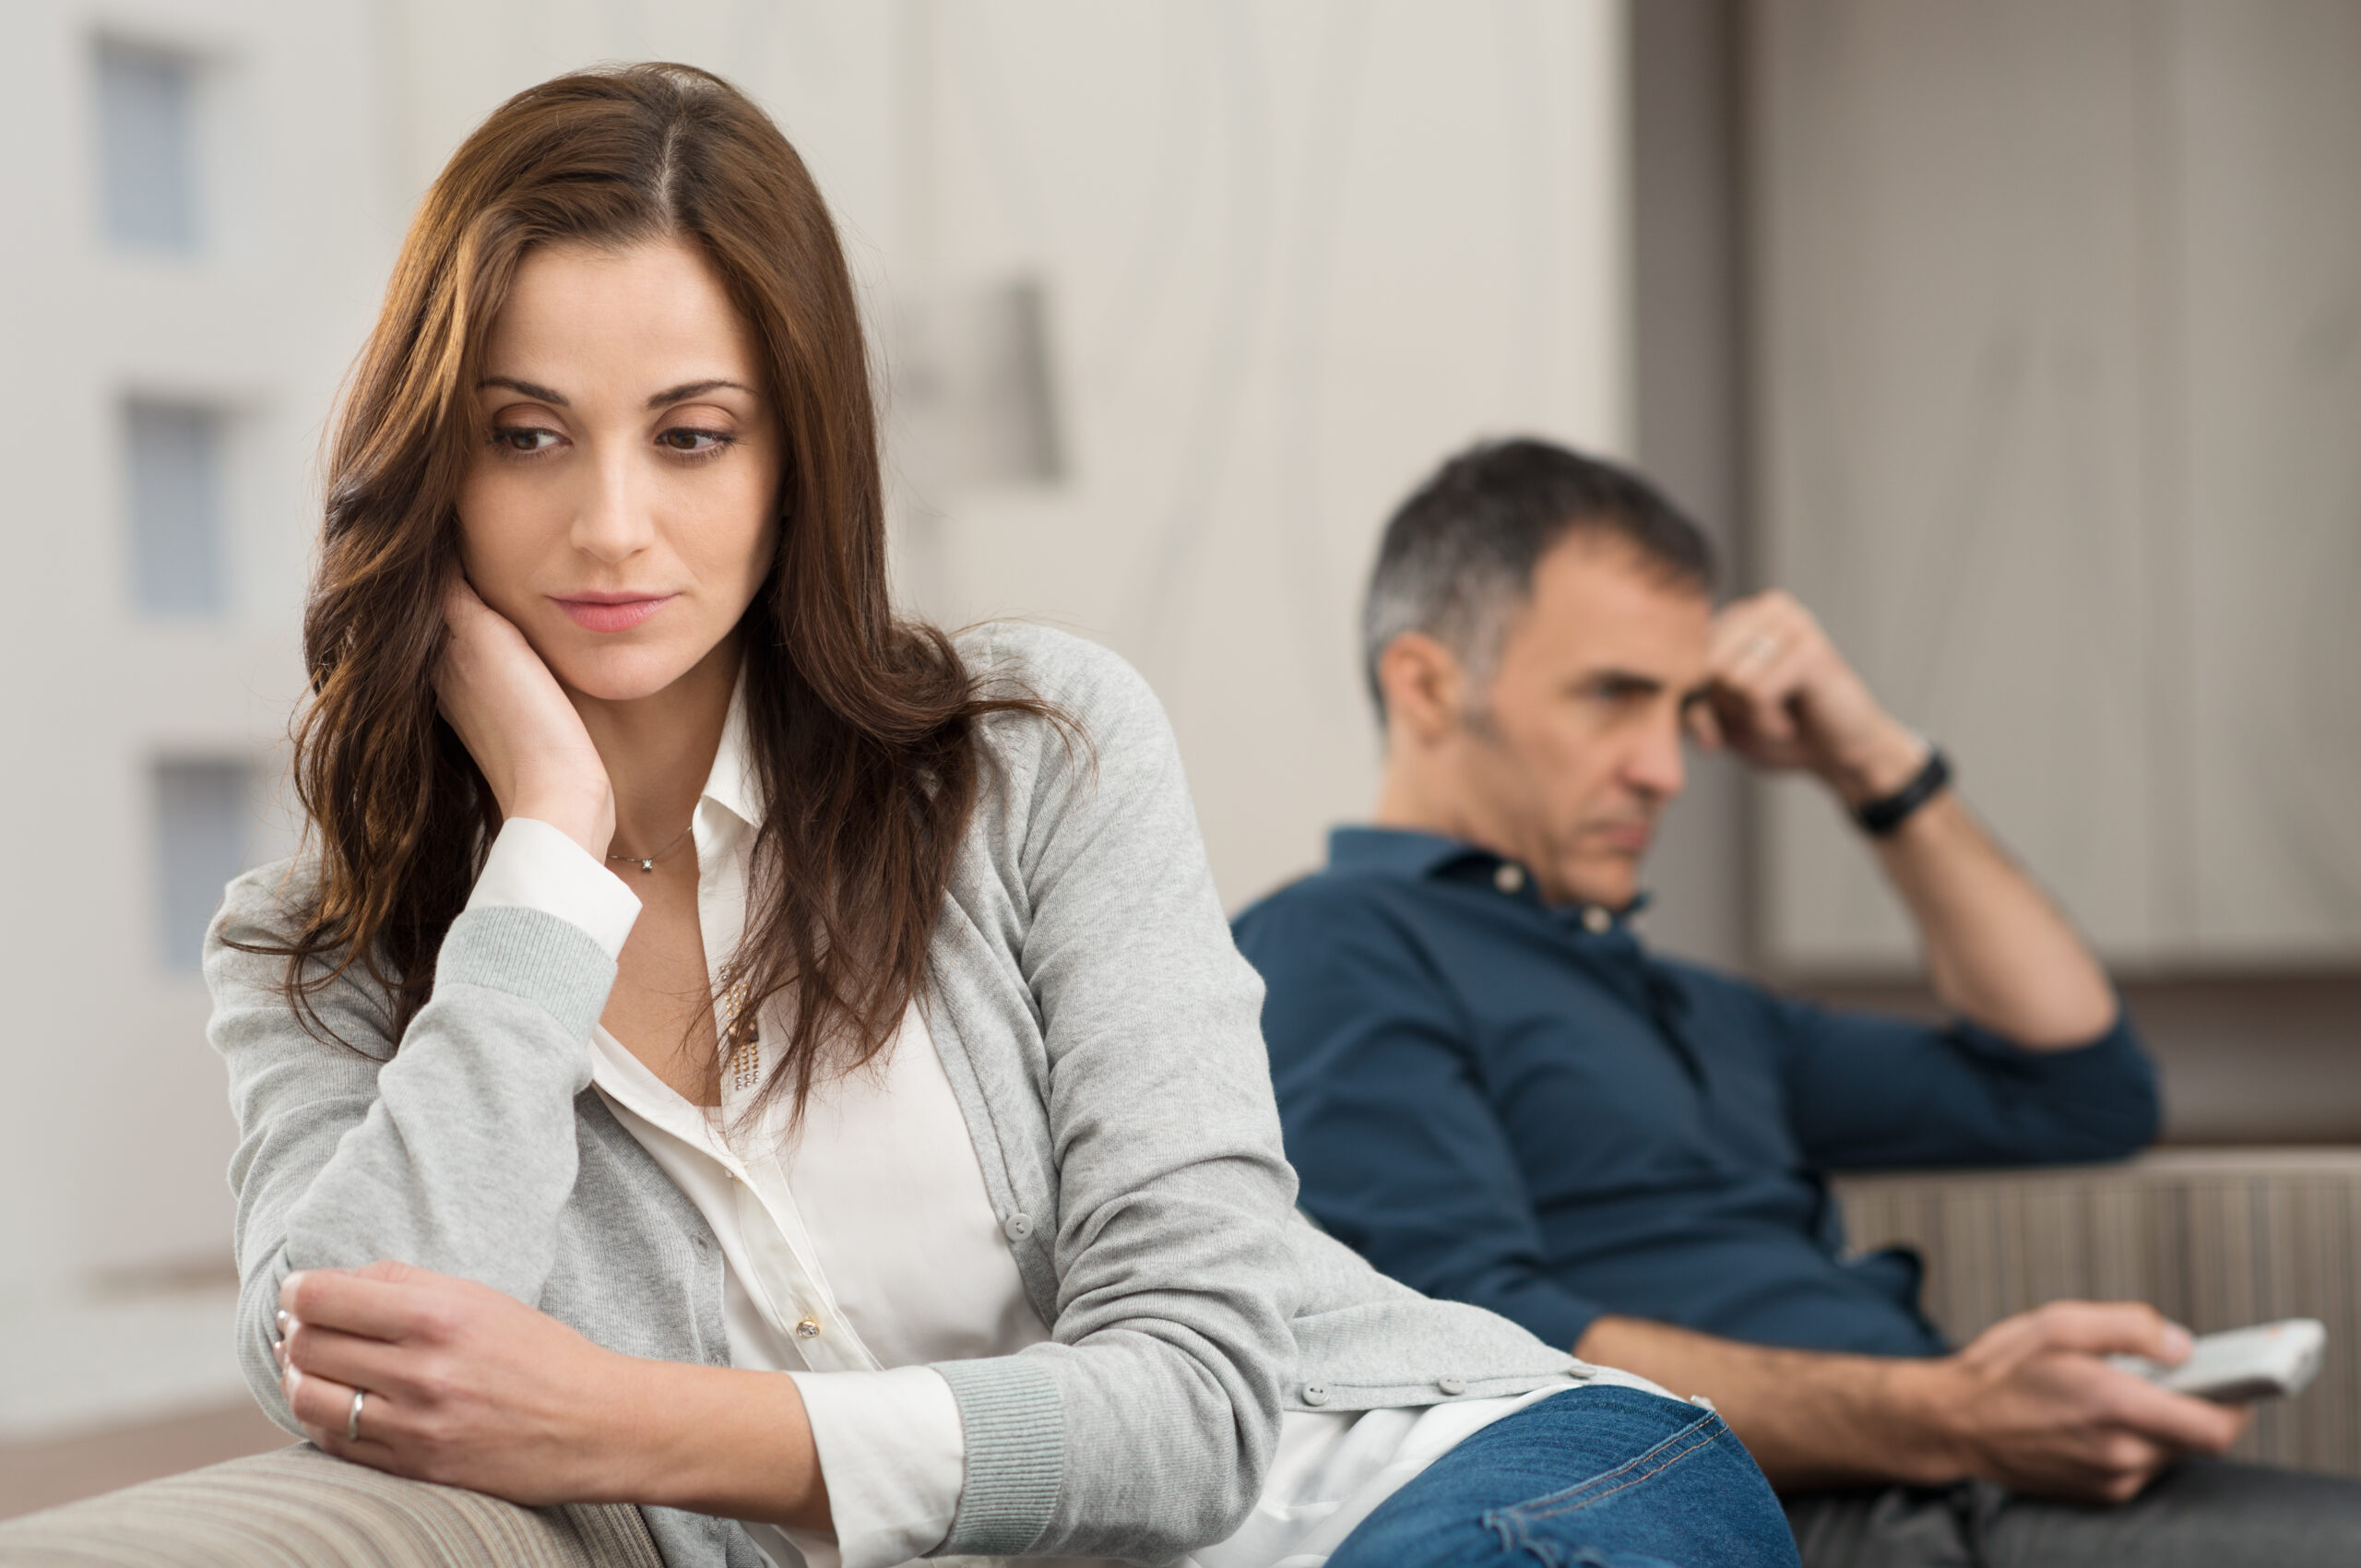 What to Look for When Hiring a Divorce Attorney